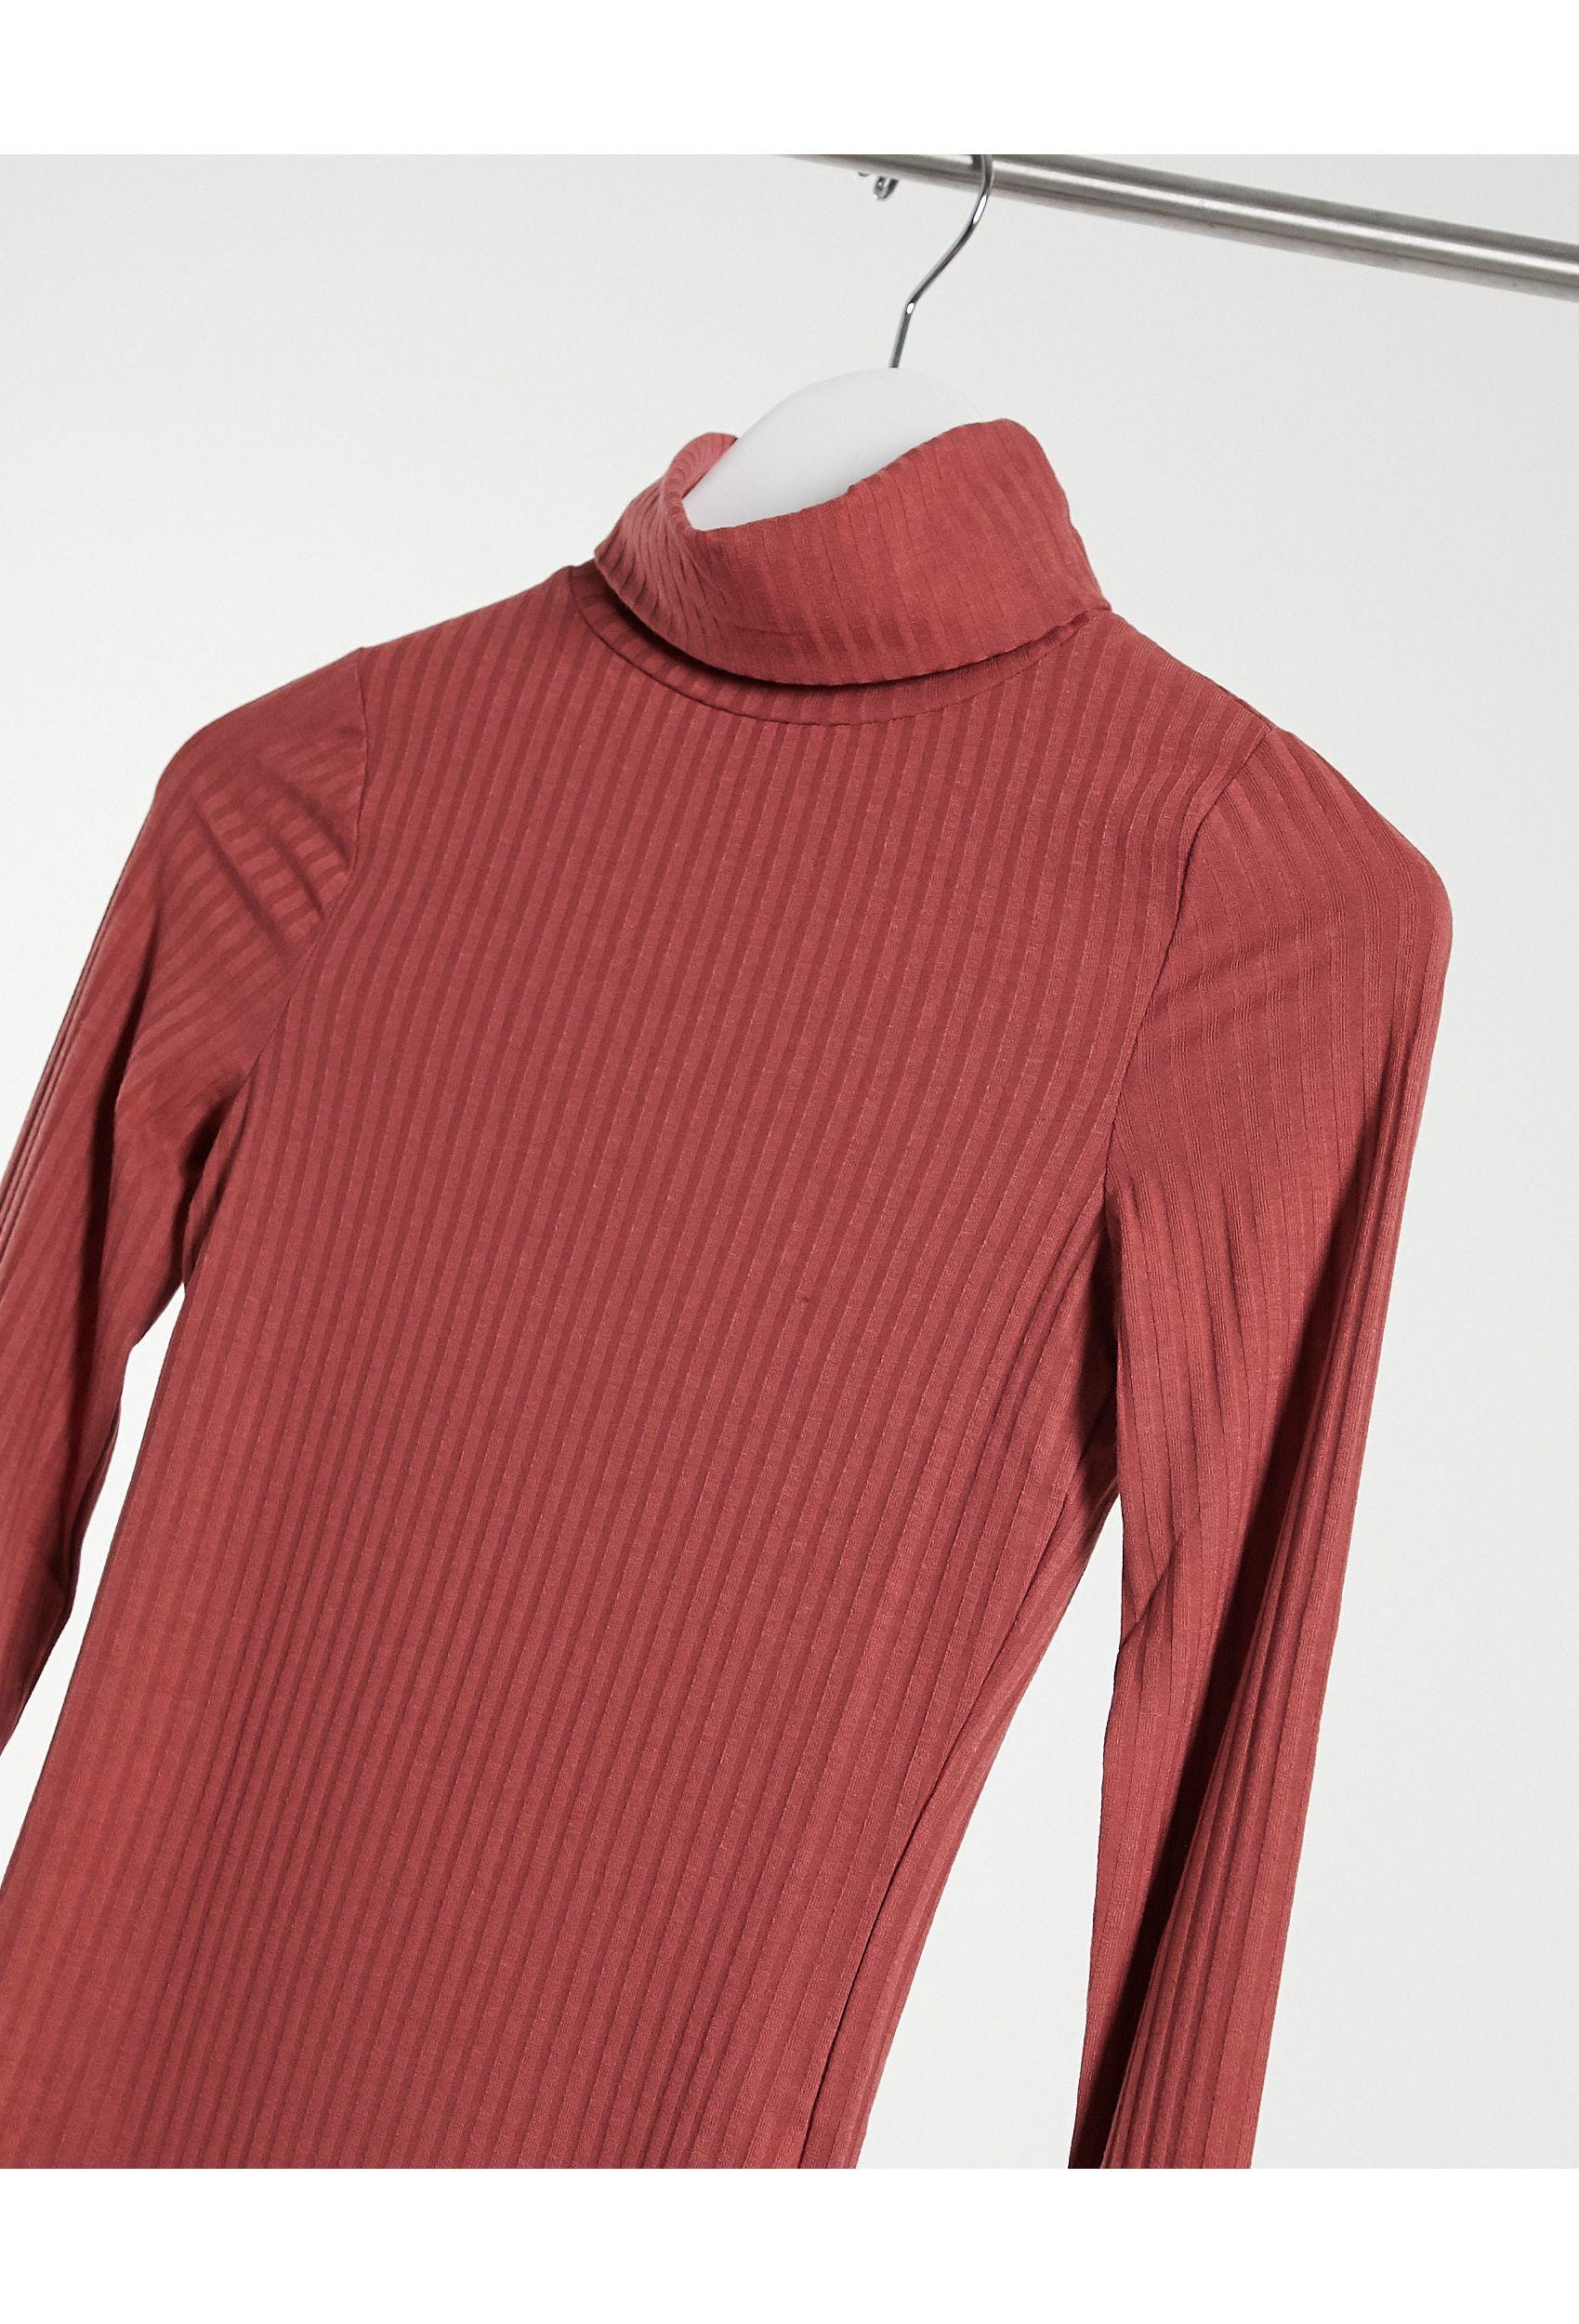 New Look Ribbed Roll Neck Top in Red - Lyst